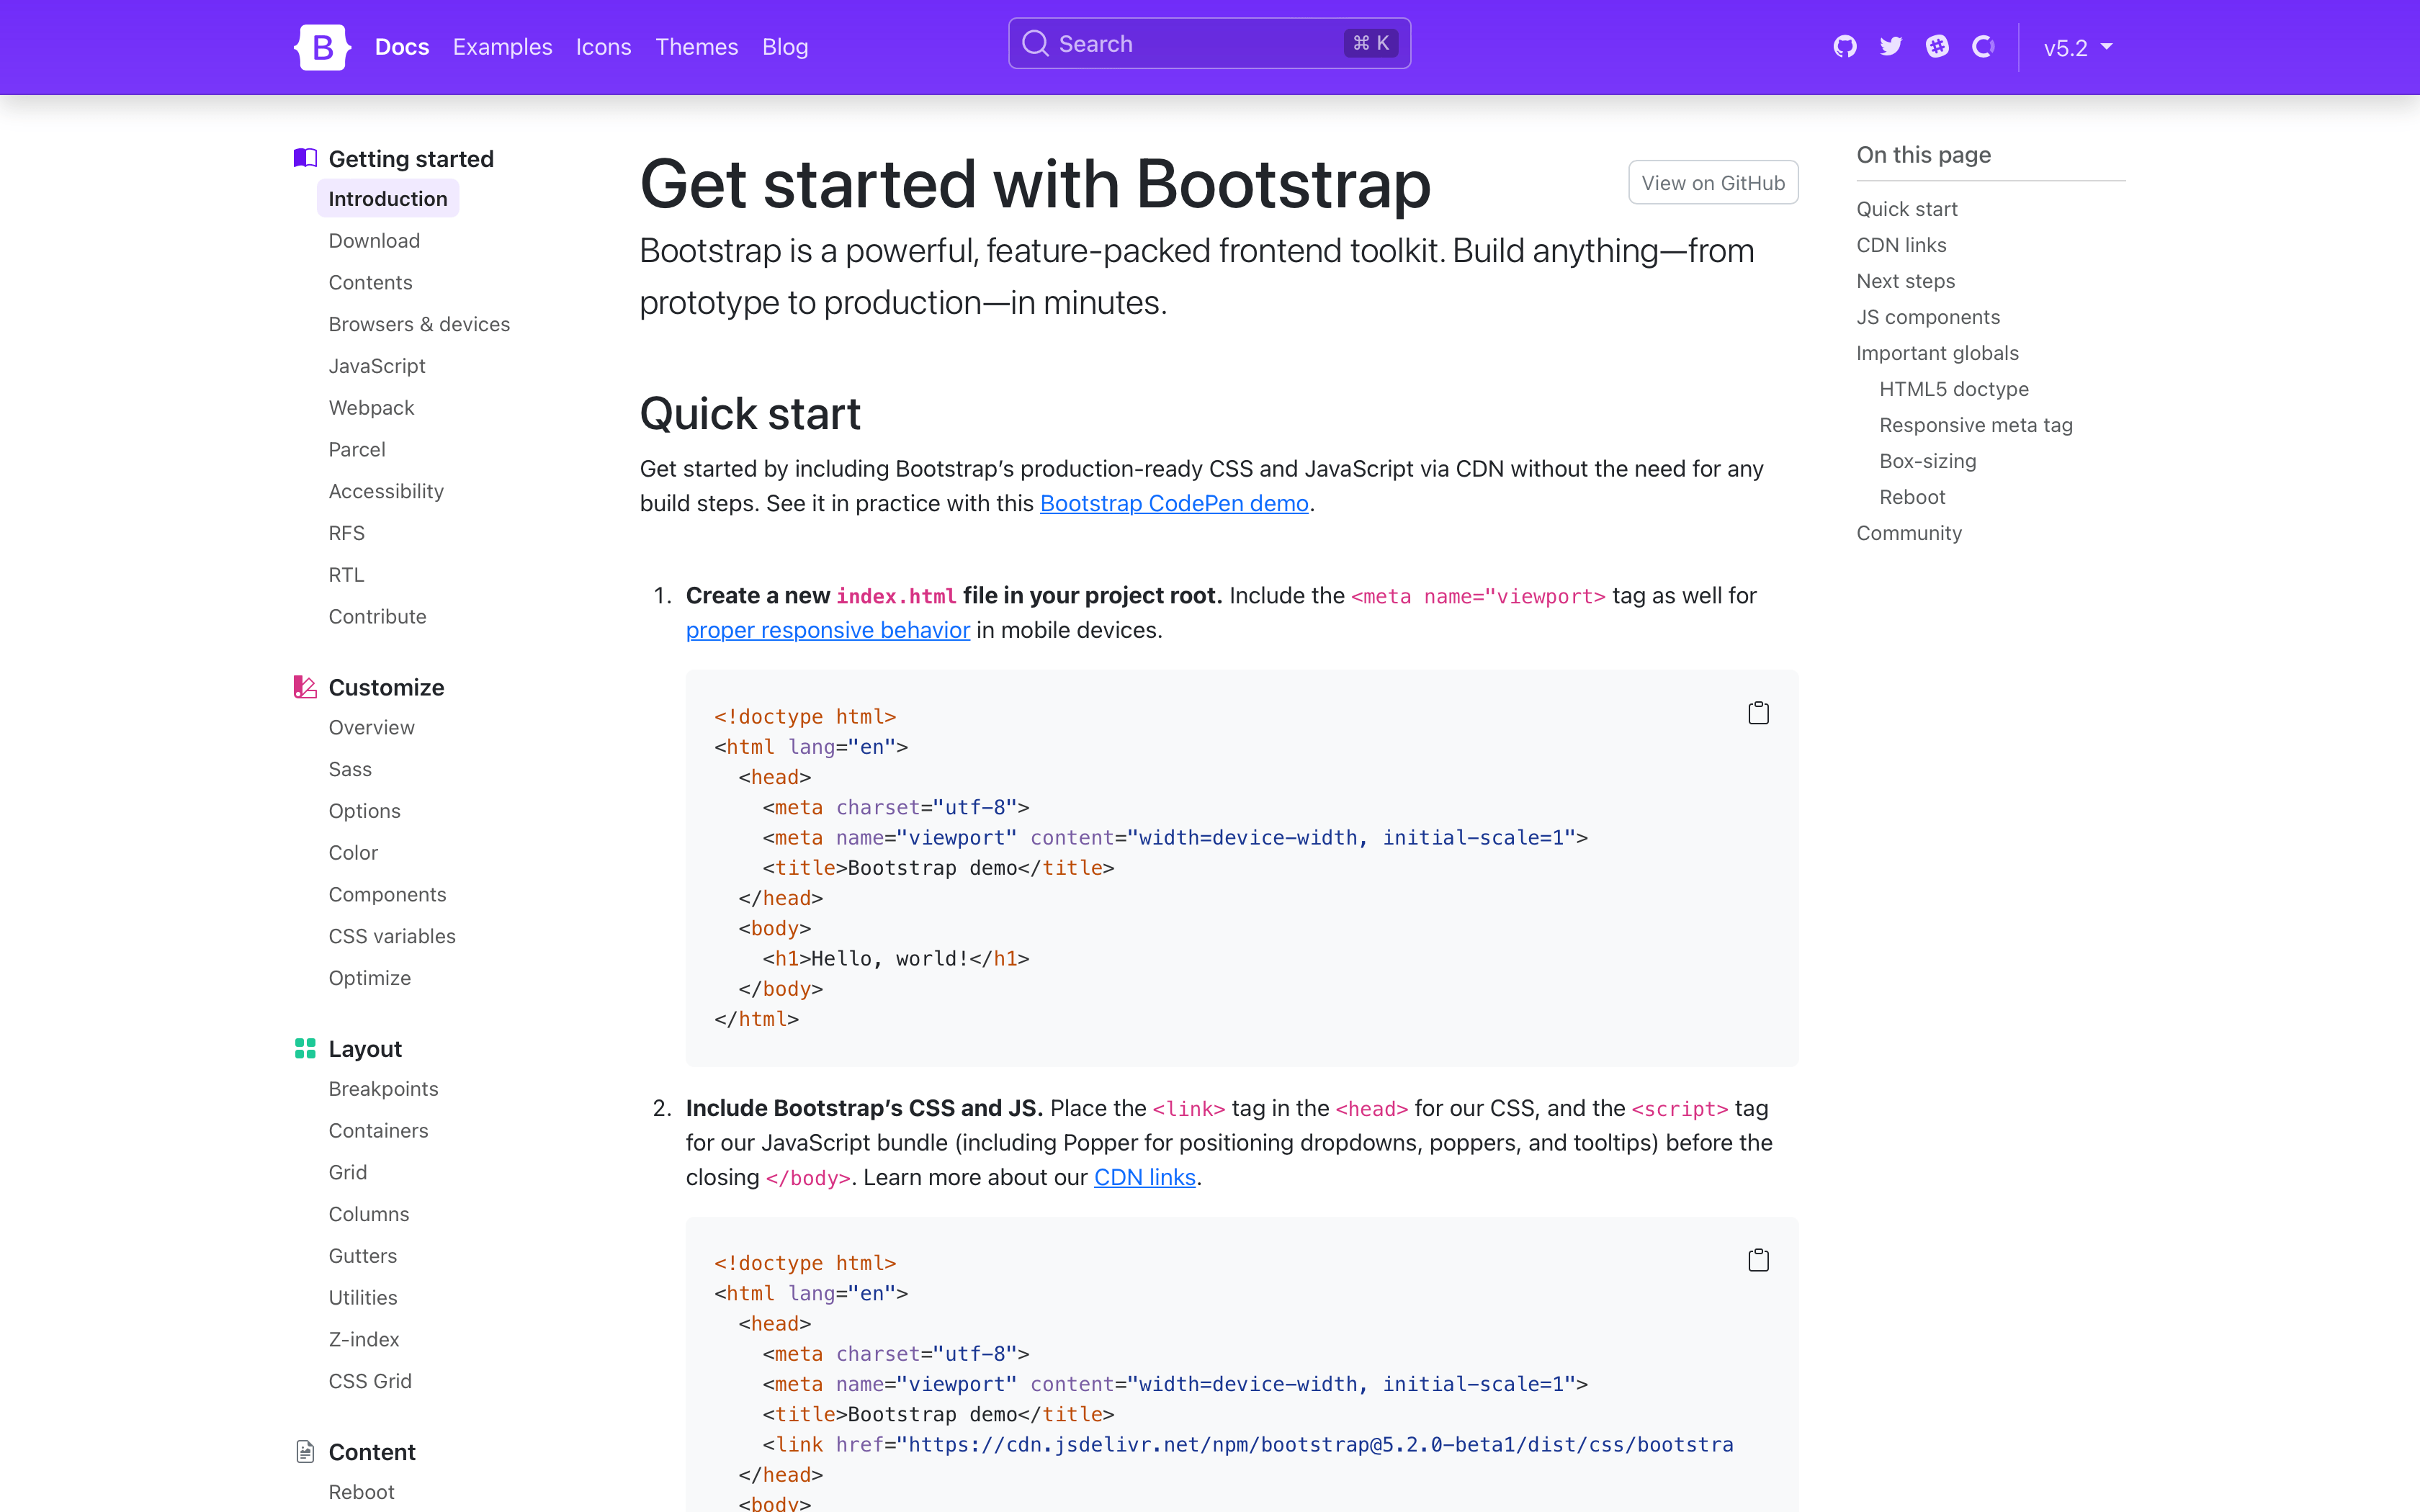 New docs page